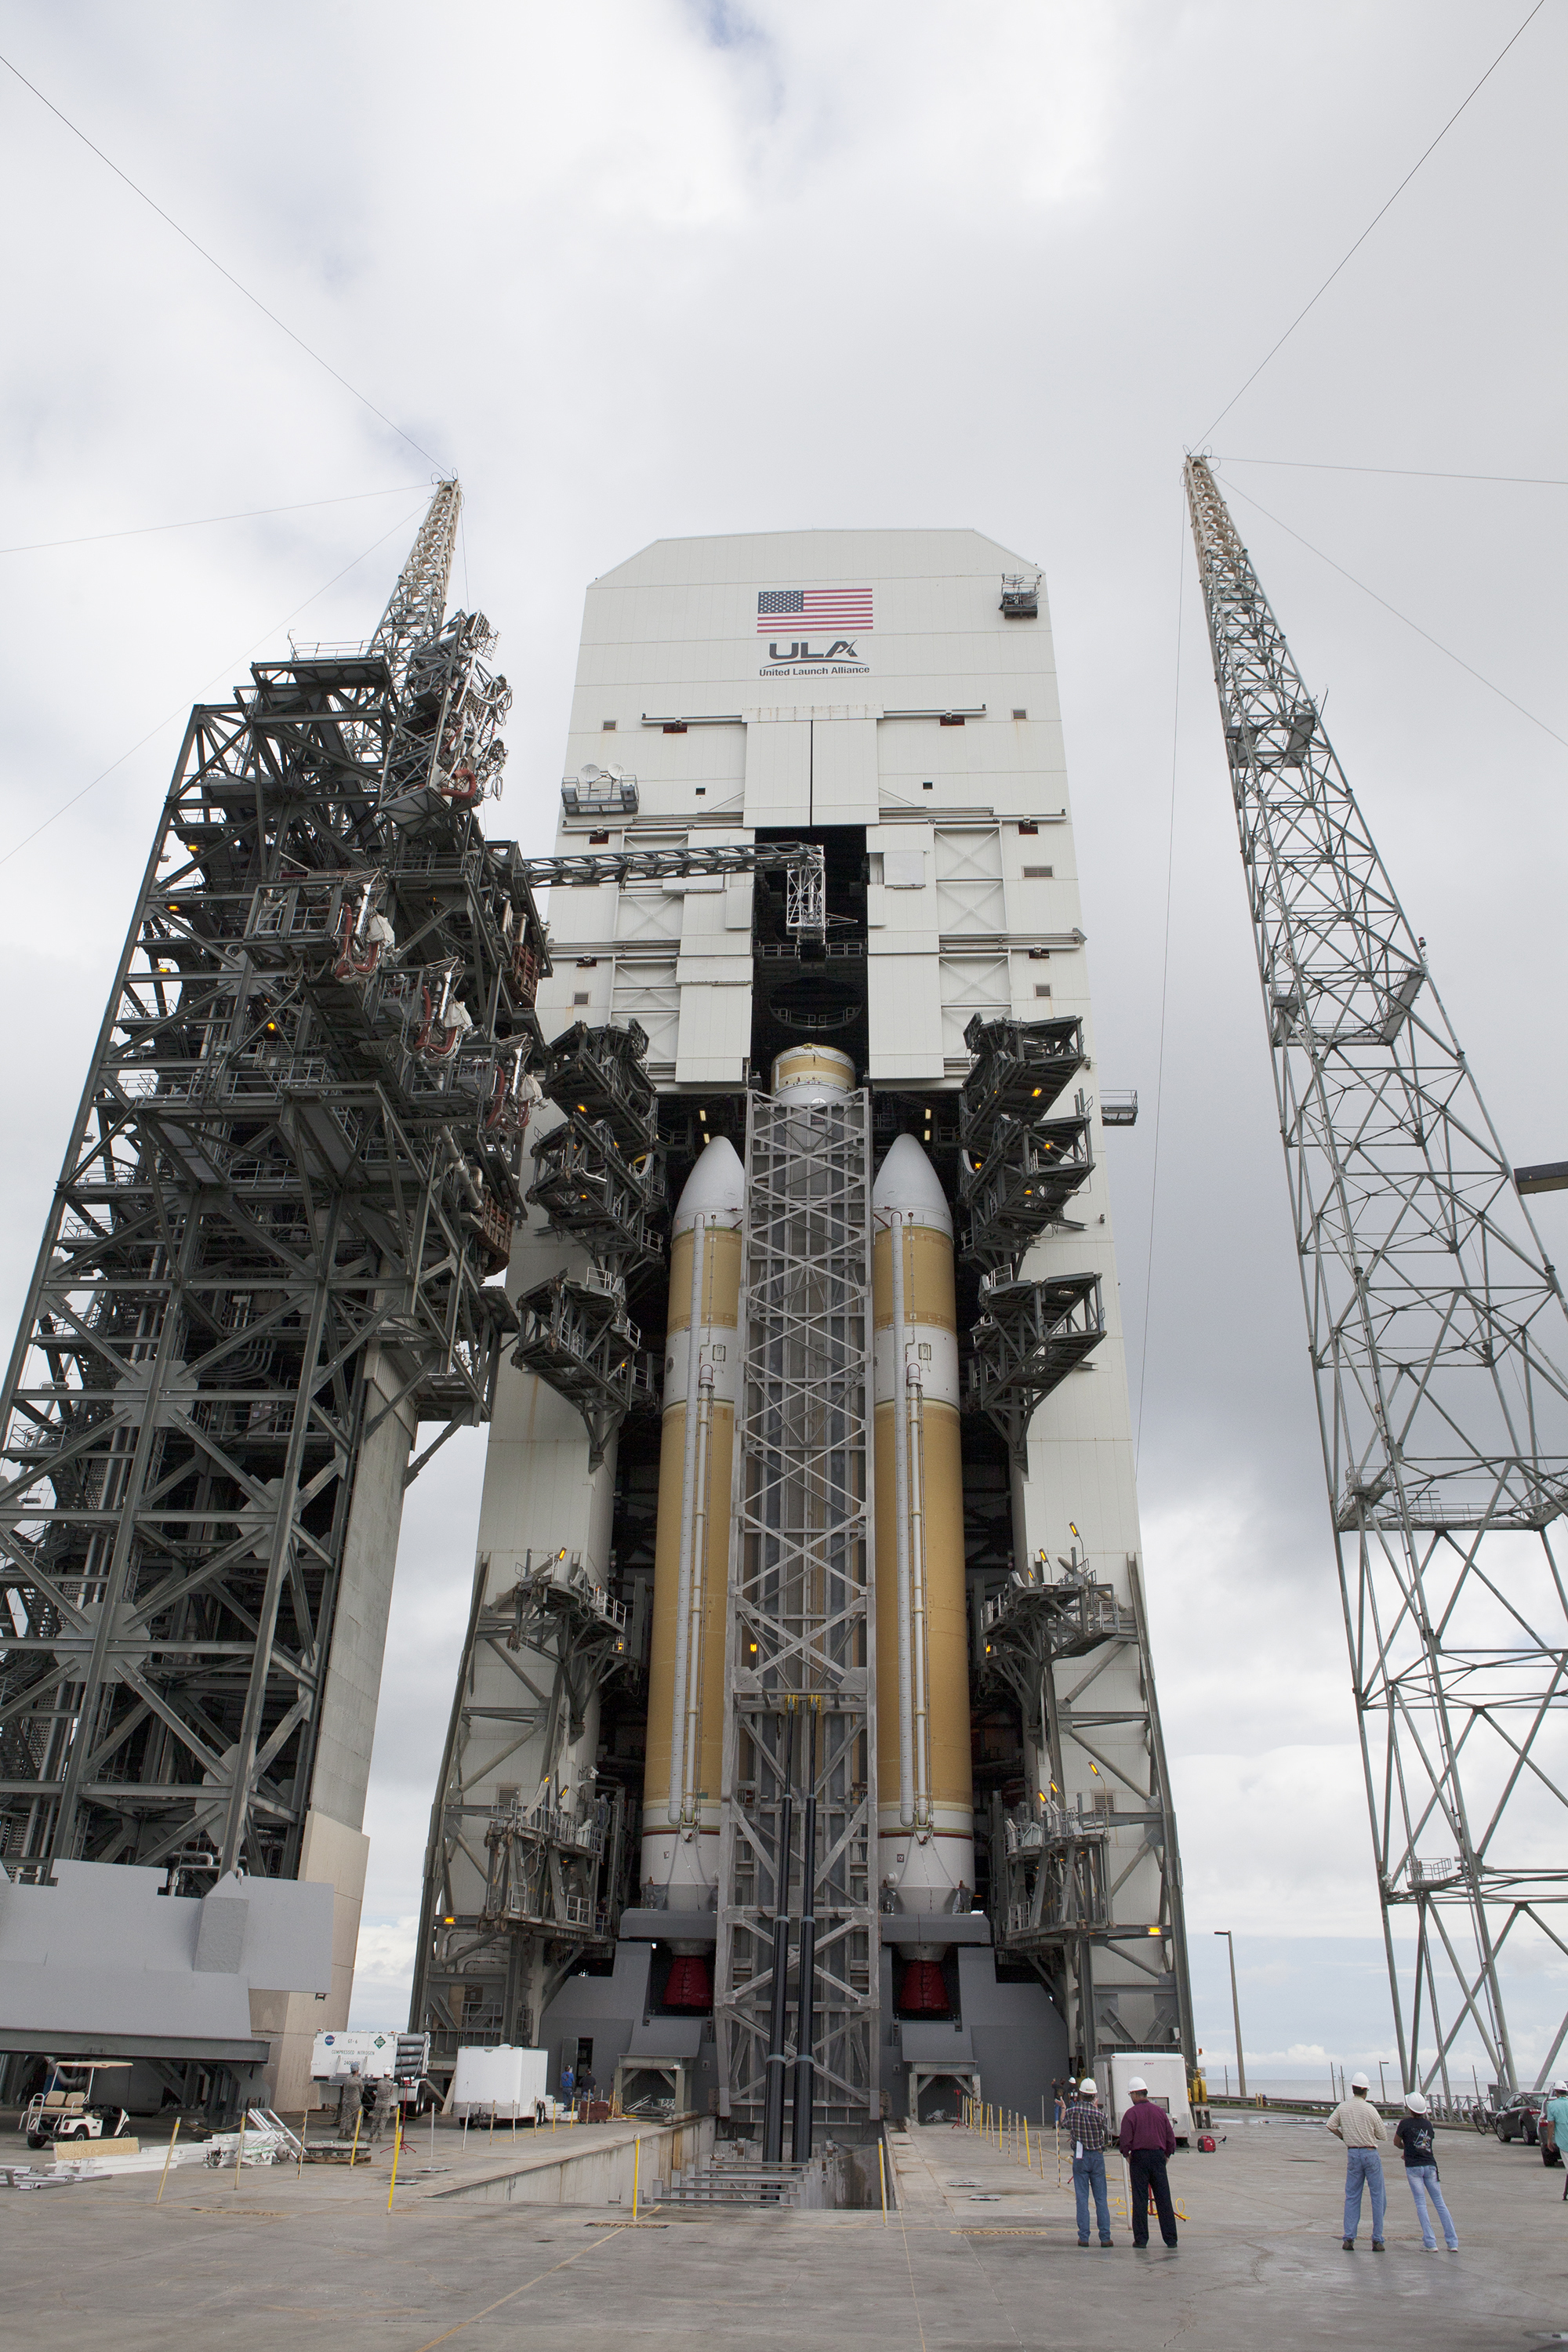 The Delta IV launch vehicle for Orion's first flight leaves the vehicle assembly building to make the journey to the launch pad - 2nd October 2014